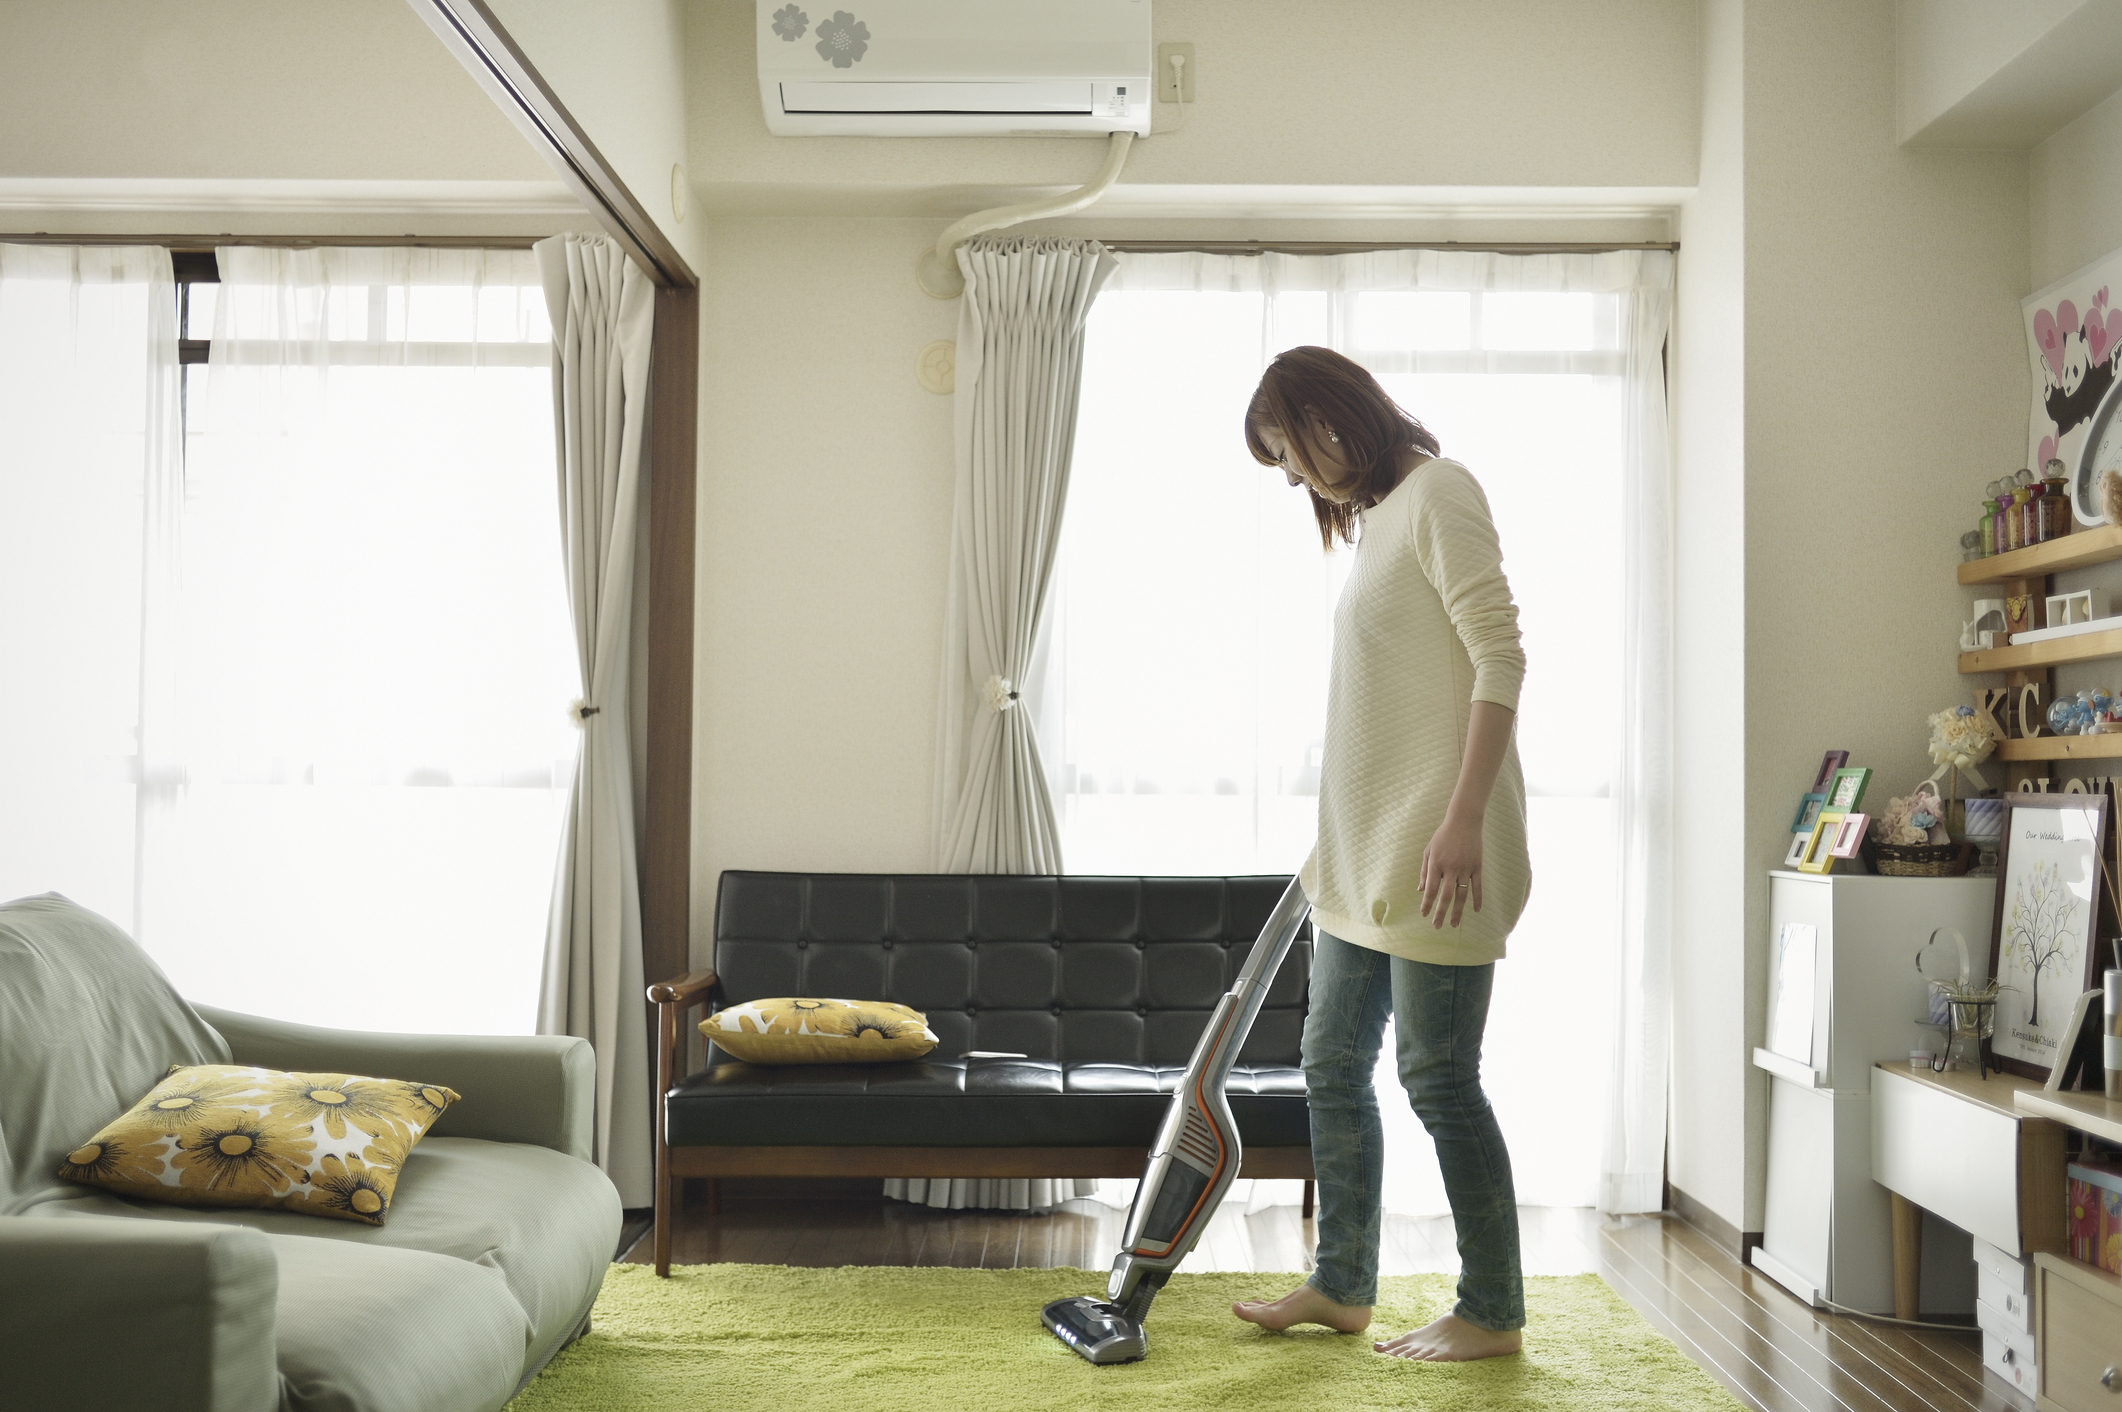 A woman cleans the room with a vacuum cleaner